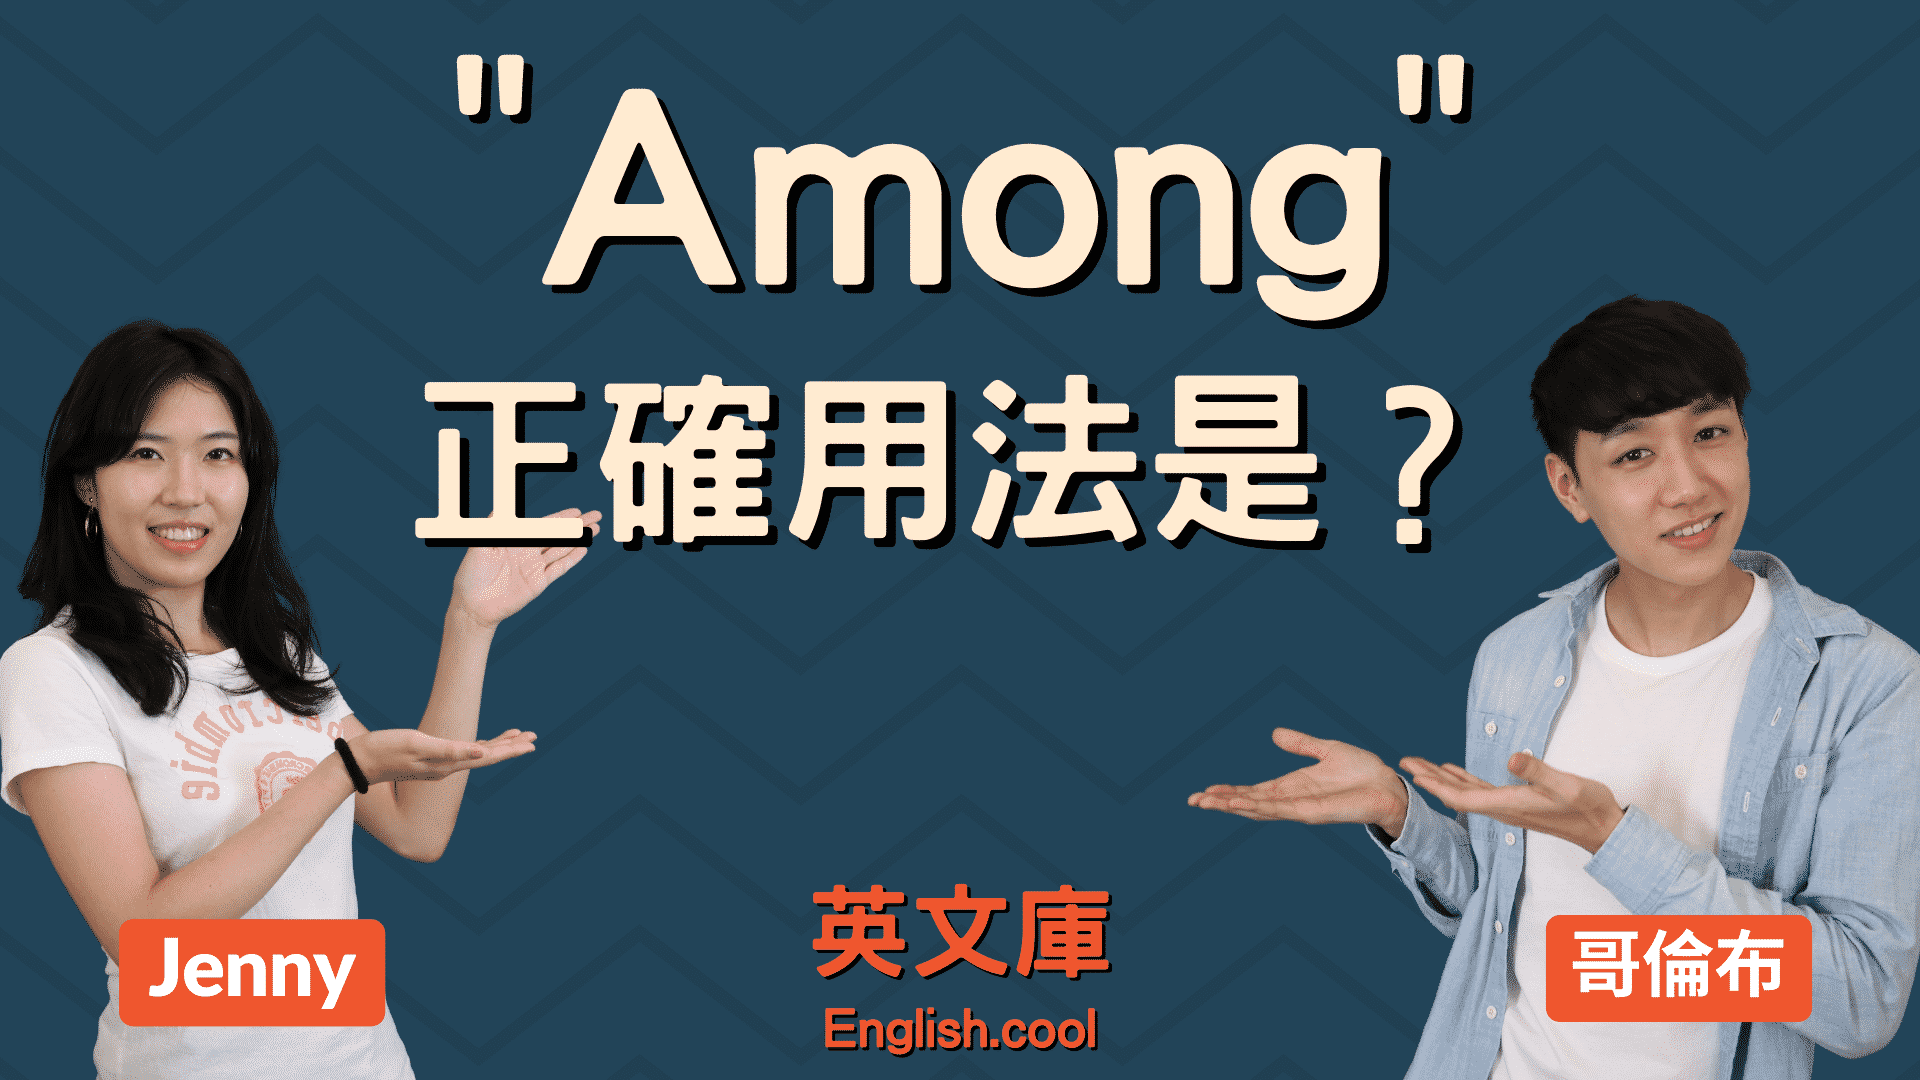 You are currently viewing 「among」正確用法是？跟 between 差在哪？(含例句）